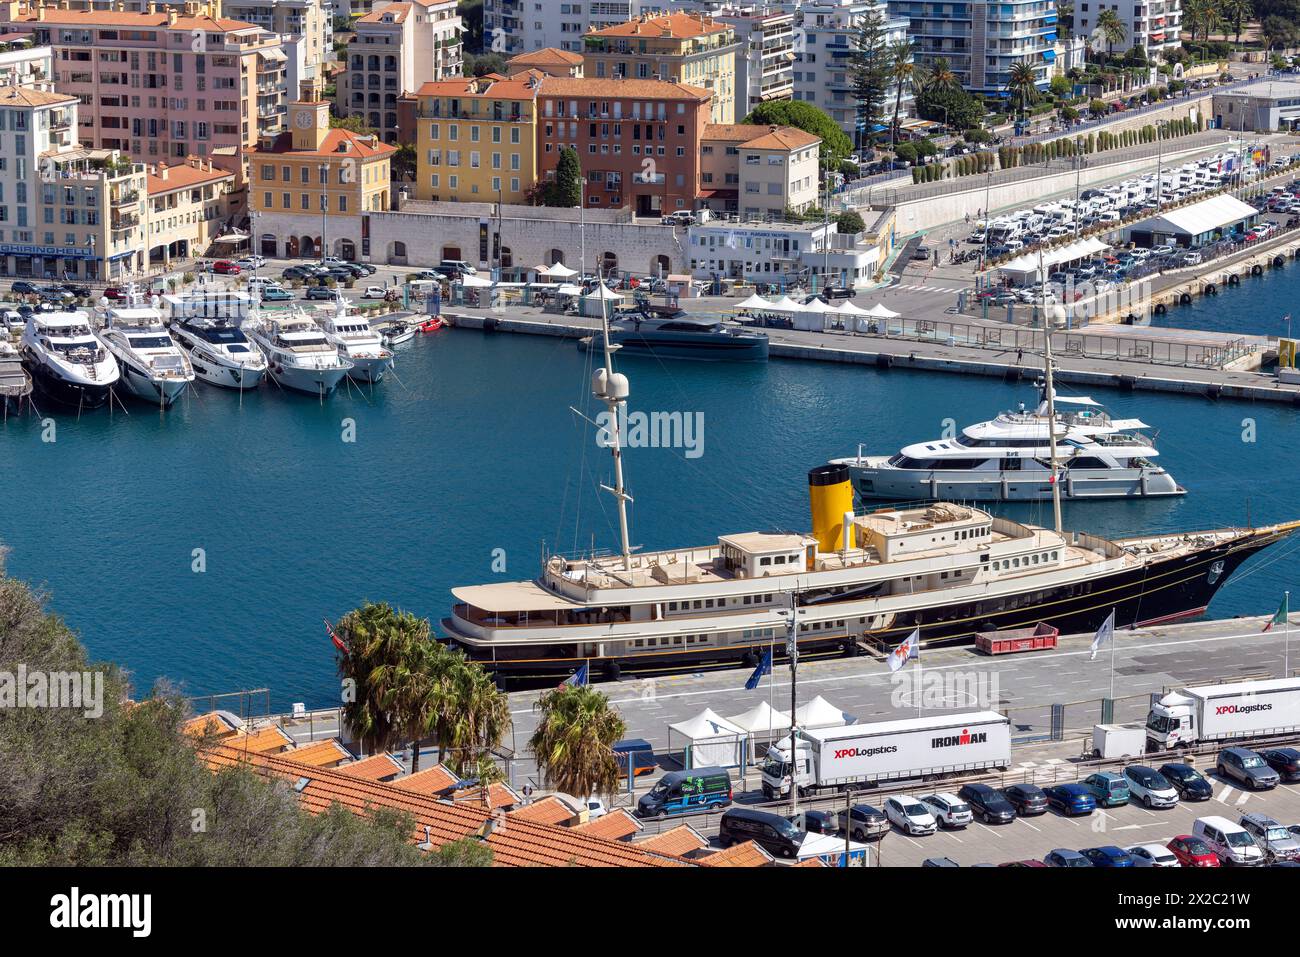 Yachts in the harbour at Nice, Cote d'Azur, France Stock Photo